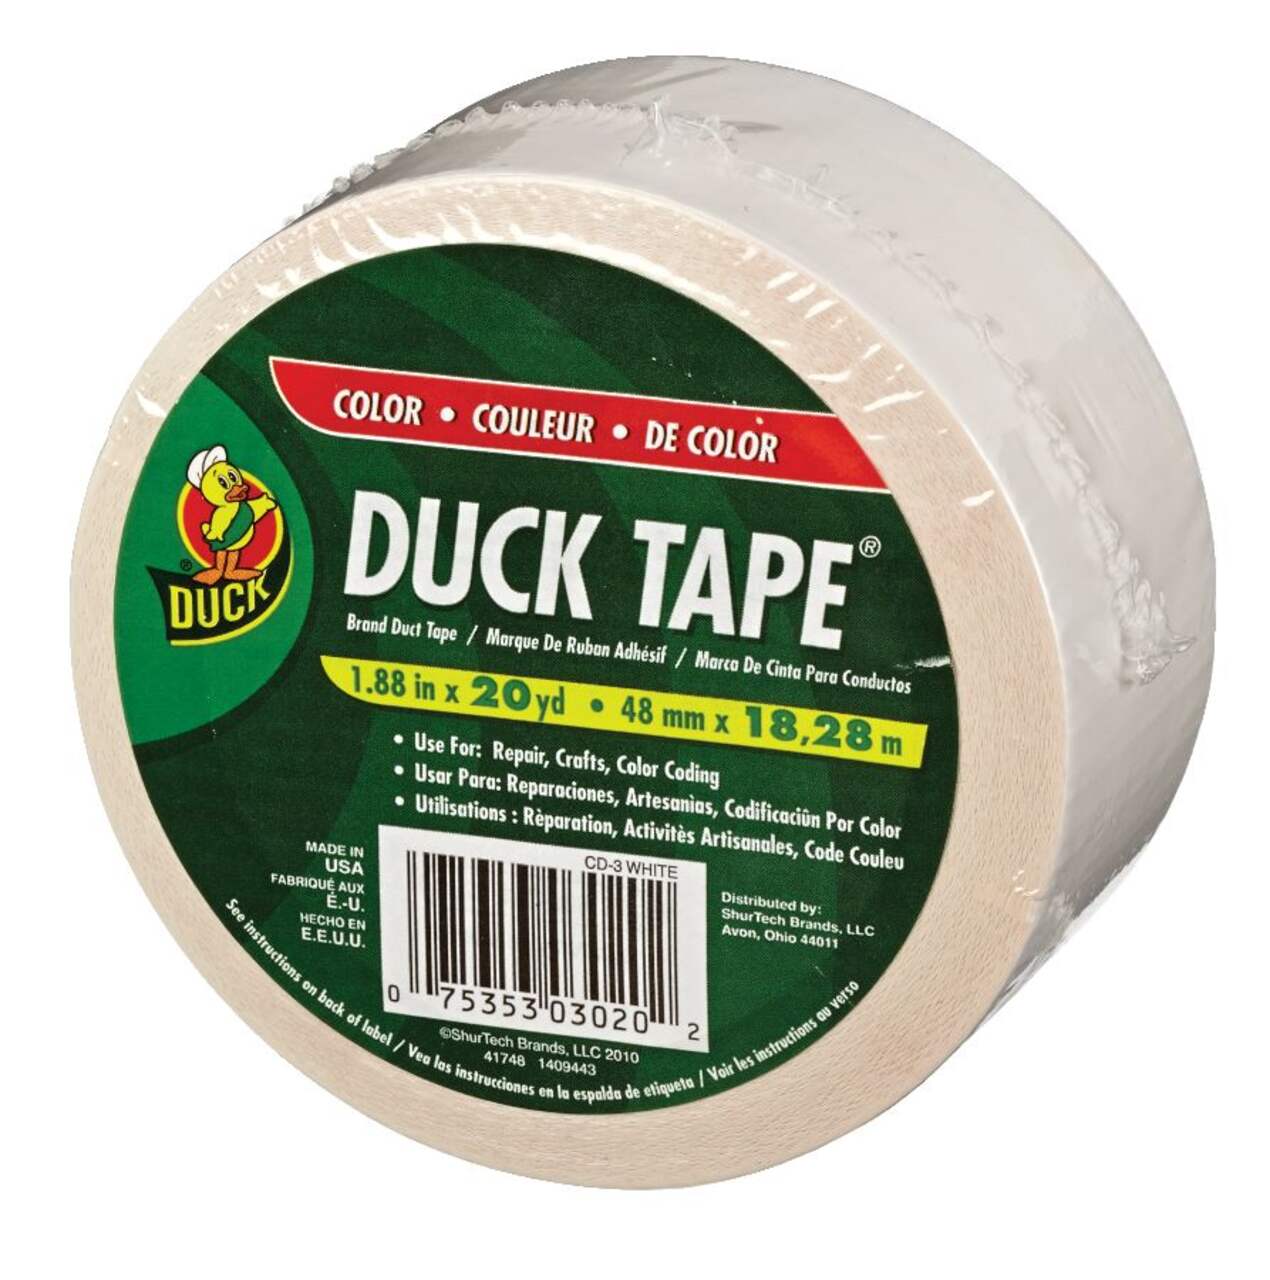 Duck Tape Multi-Purpose Utility Duct Tape, High-Strength Adhesive, White,  1.88-in x 20-yd